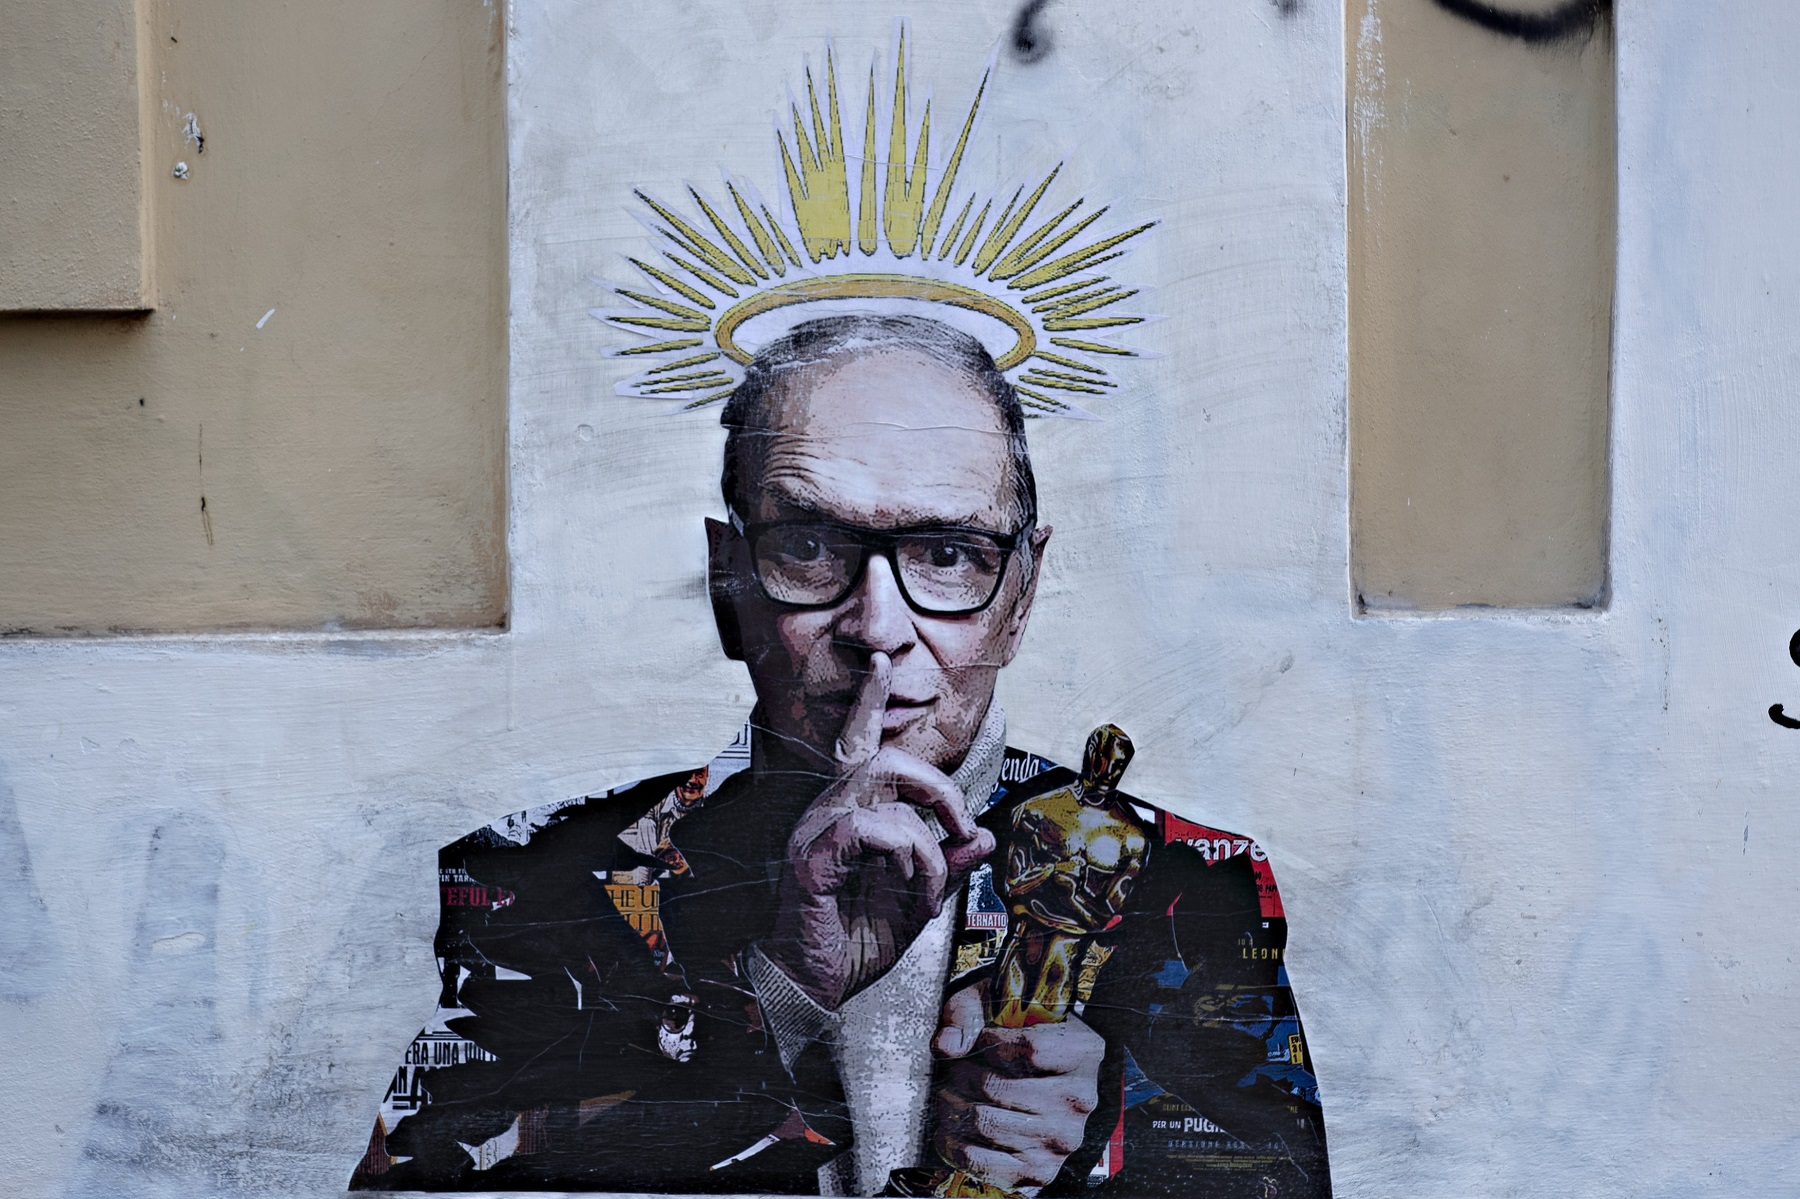 Murals by the street artist Harry Greb dedicated to musician and composer Ennio Morricone
Murals dedicated to Ennio Morricone, Rome, Italy - 06 Jul 2020,Image: 540906720, License: Rights-managed, Restrictions: , Model Release: no, Credit line: Francesco Fotia/AGF / Shutterstock Editorial / Profimedia